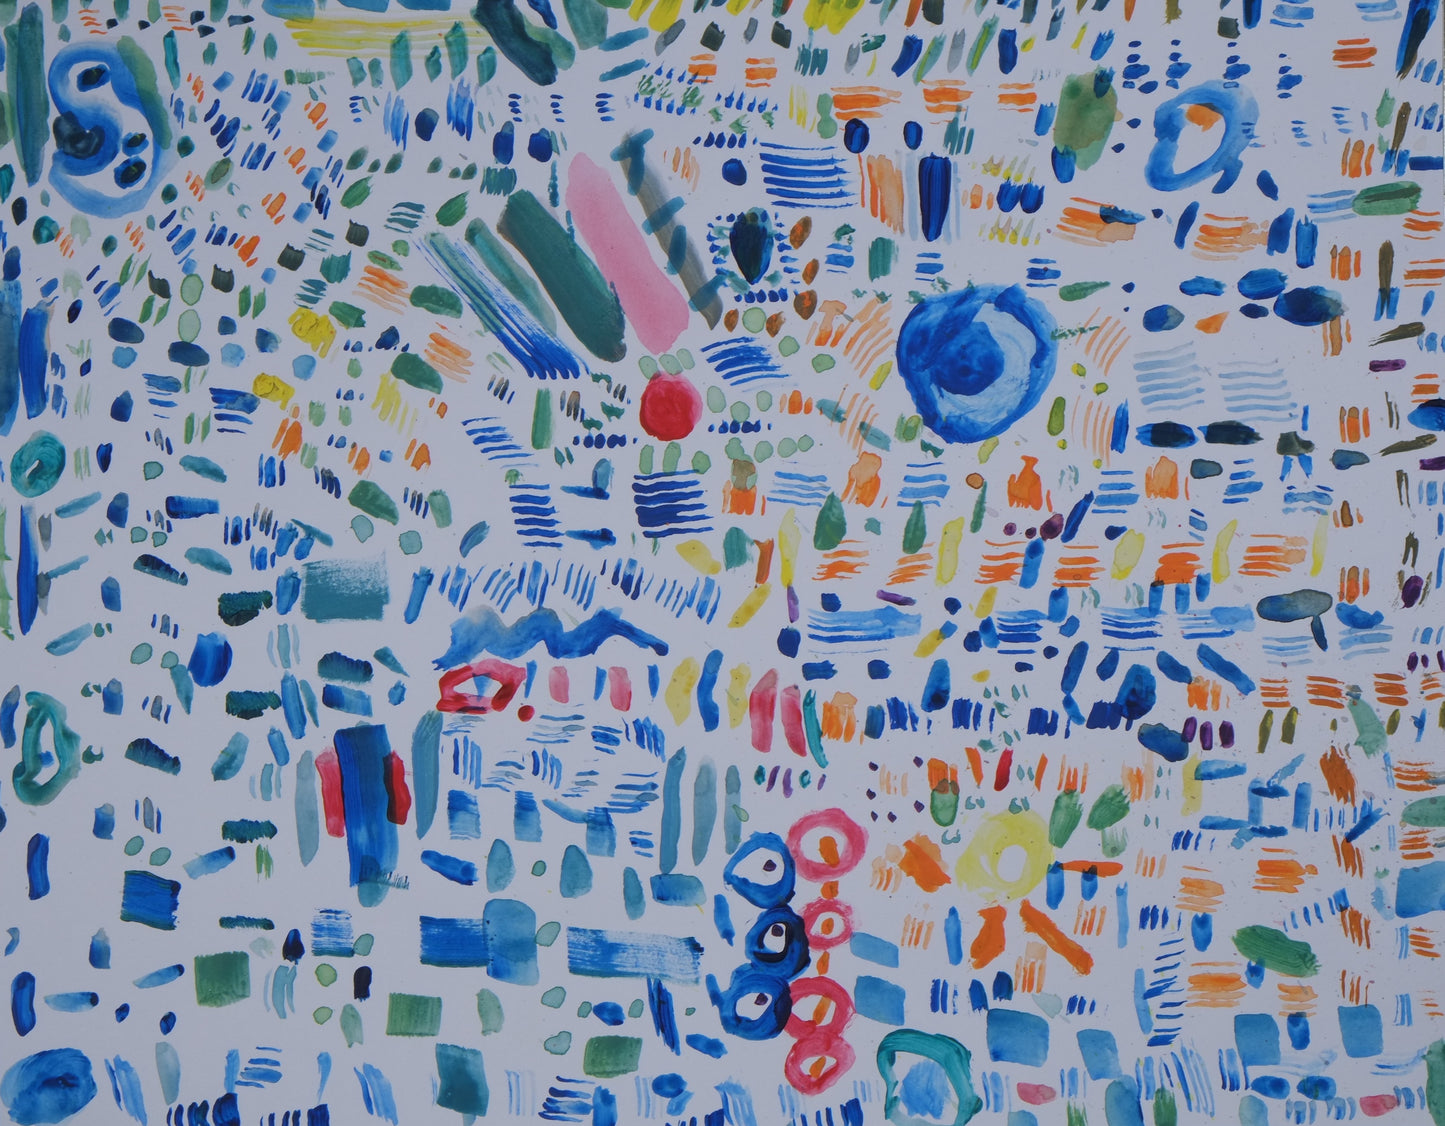 Acrylic on paper artwork on a mostly white background with tiny lines of blue, orange and yellow with larger streaks of green and pink with a few blue and pink circles